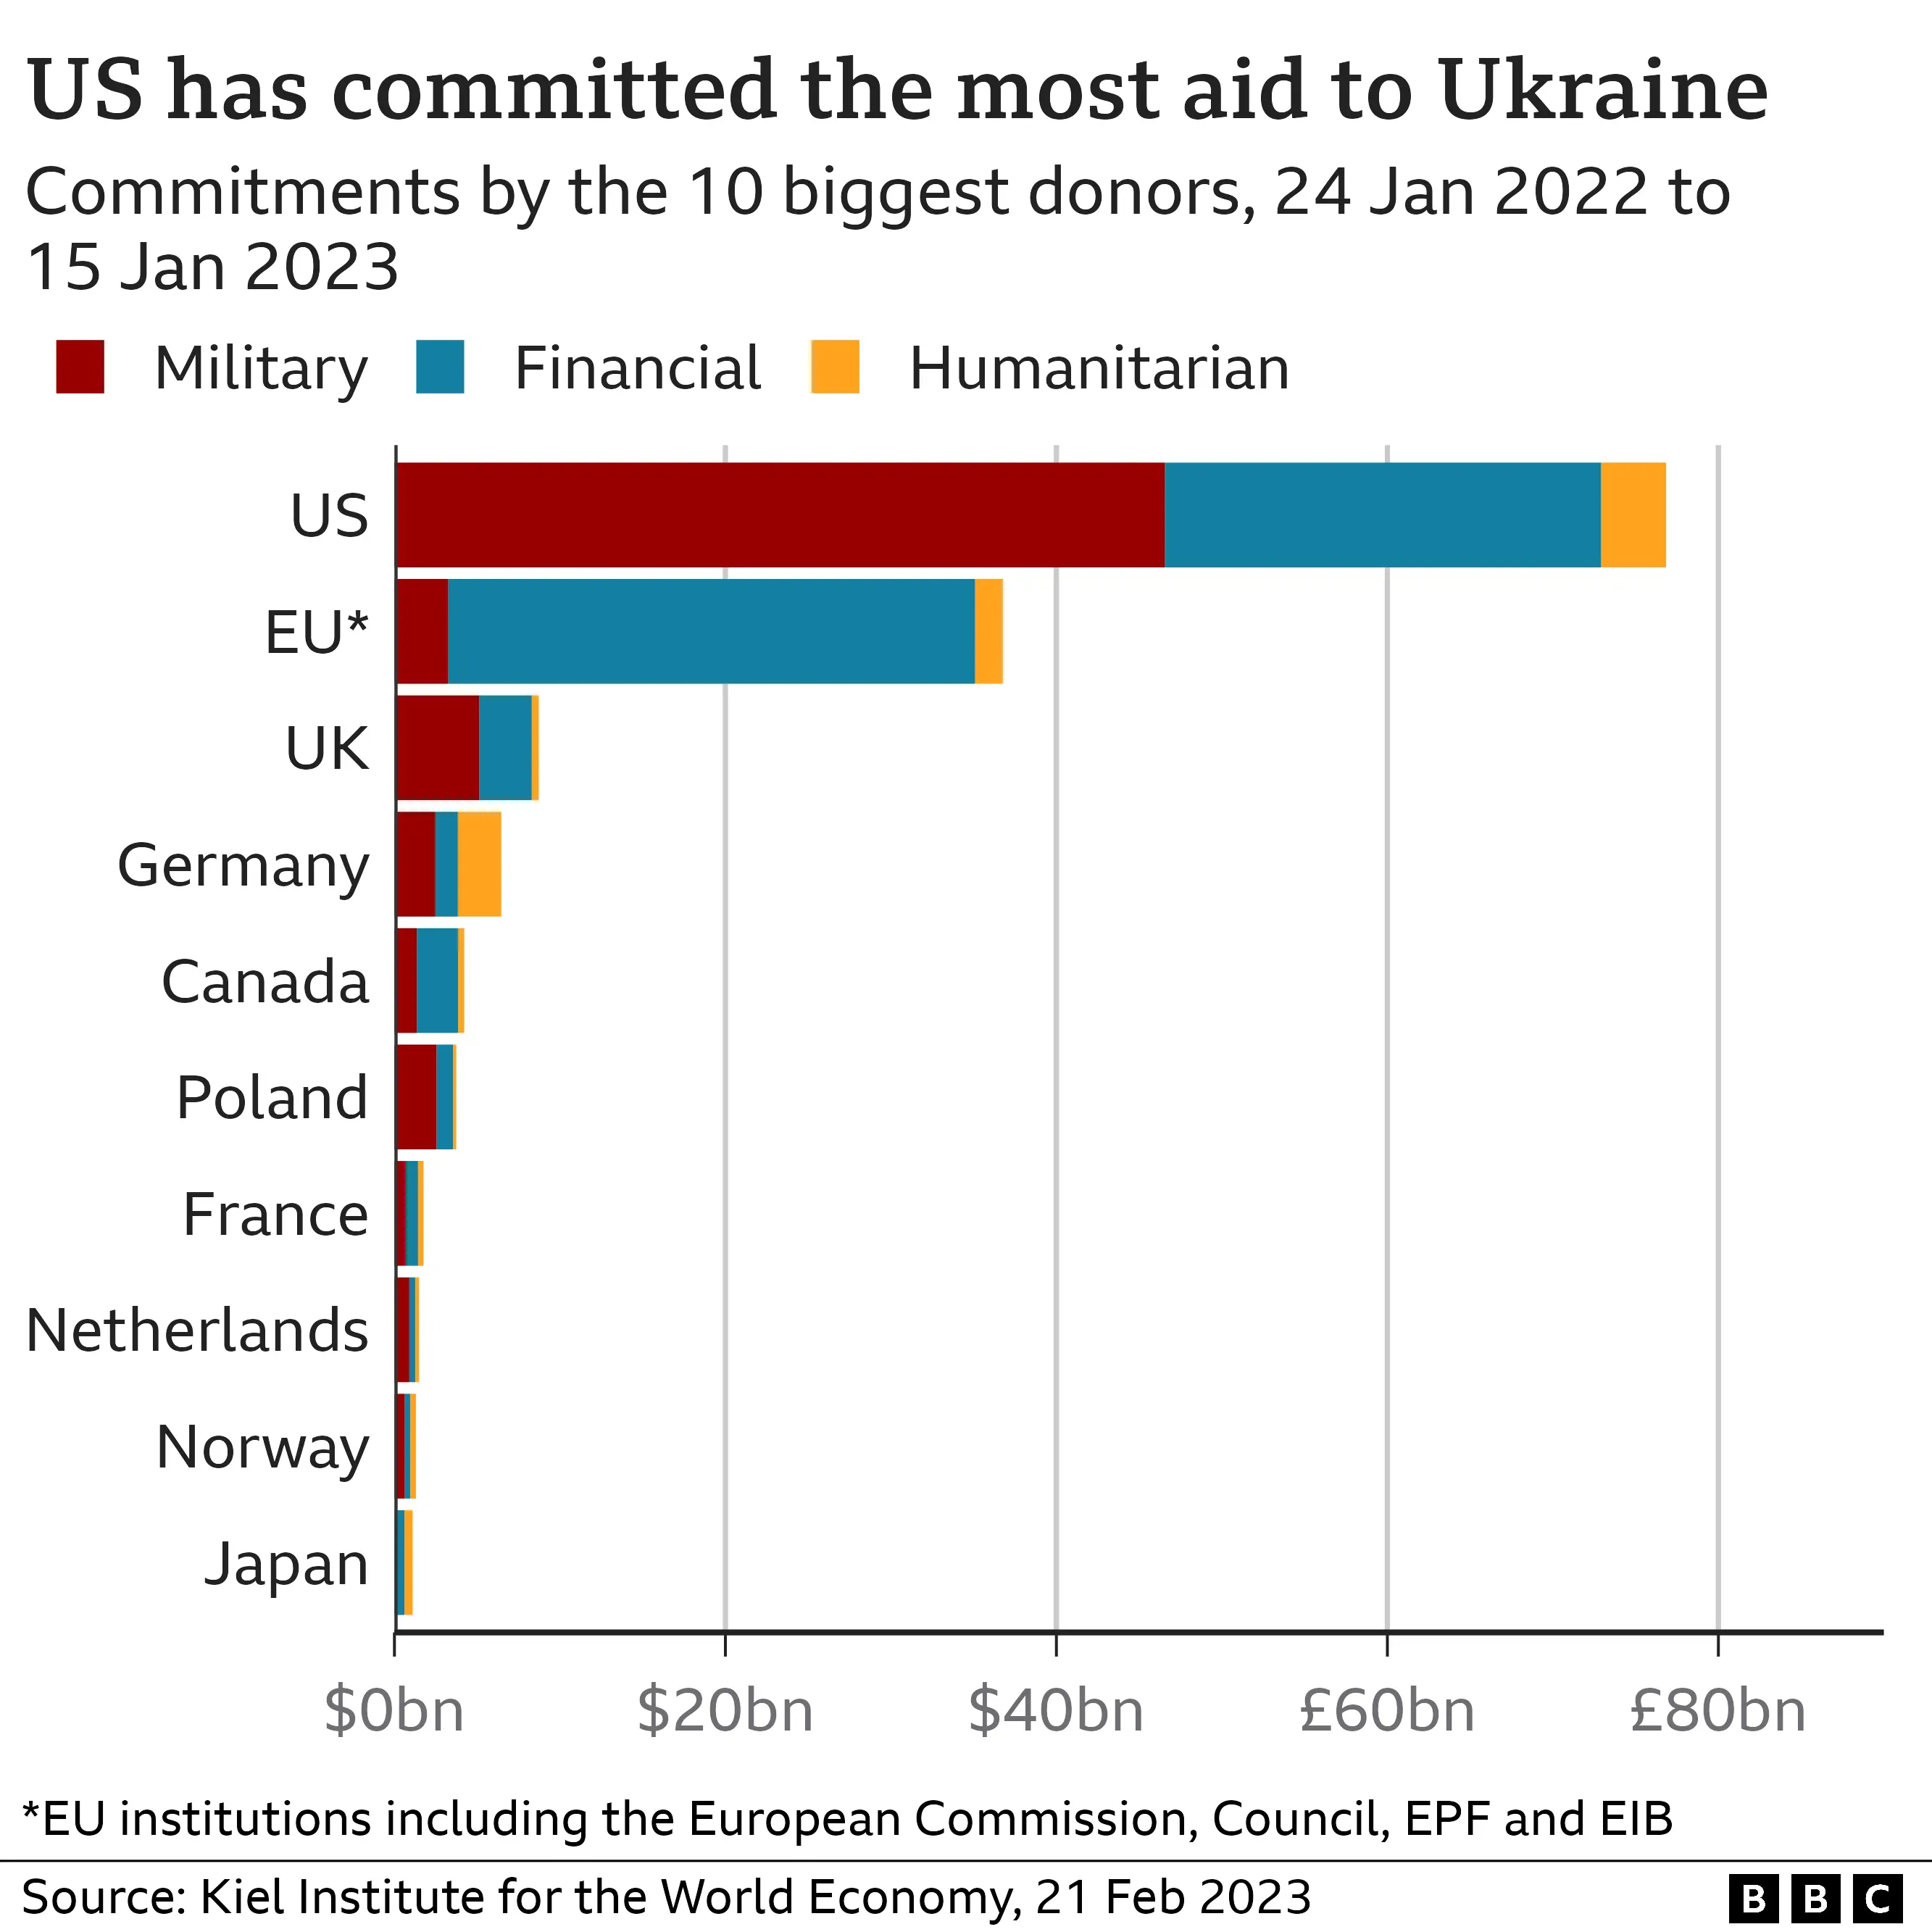 How much money has the US given to Ukraine?